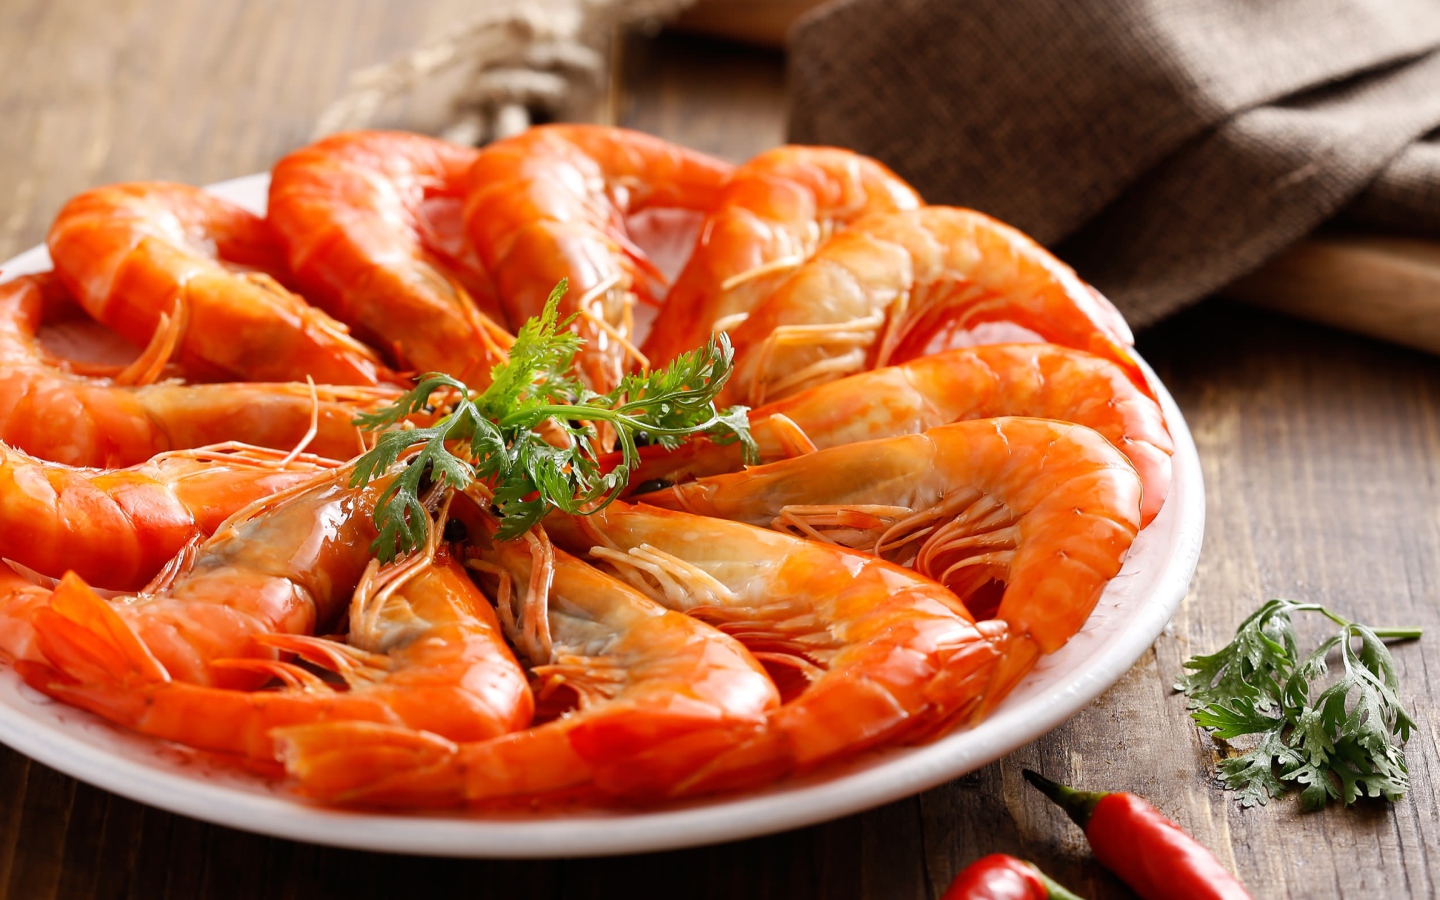 Appetizing boiled shrimps on a plate with parsley greens